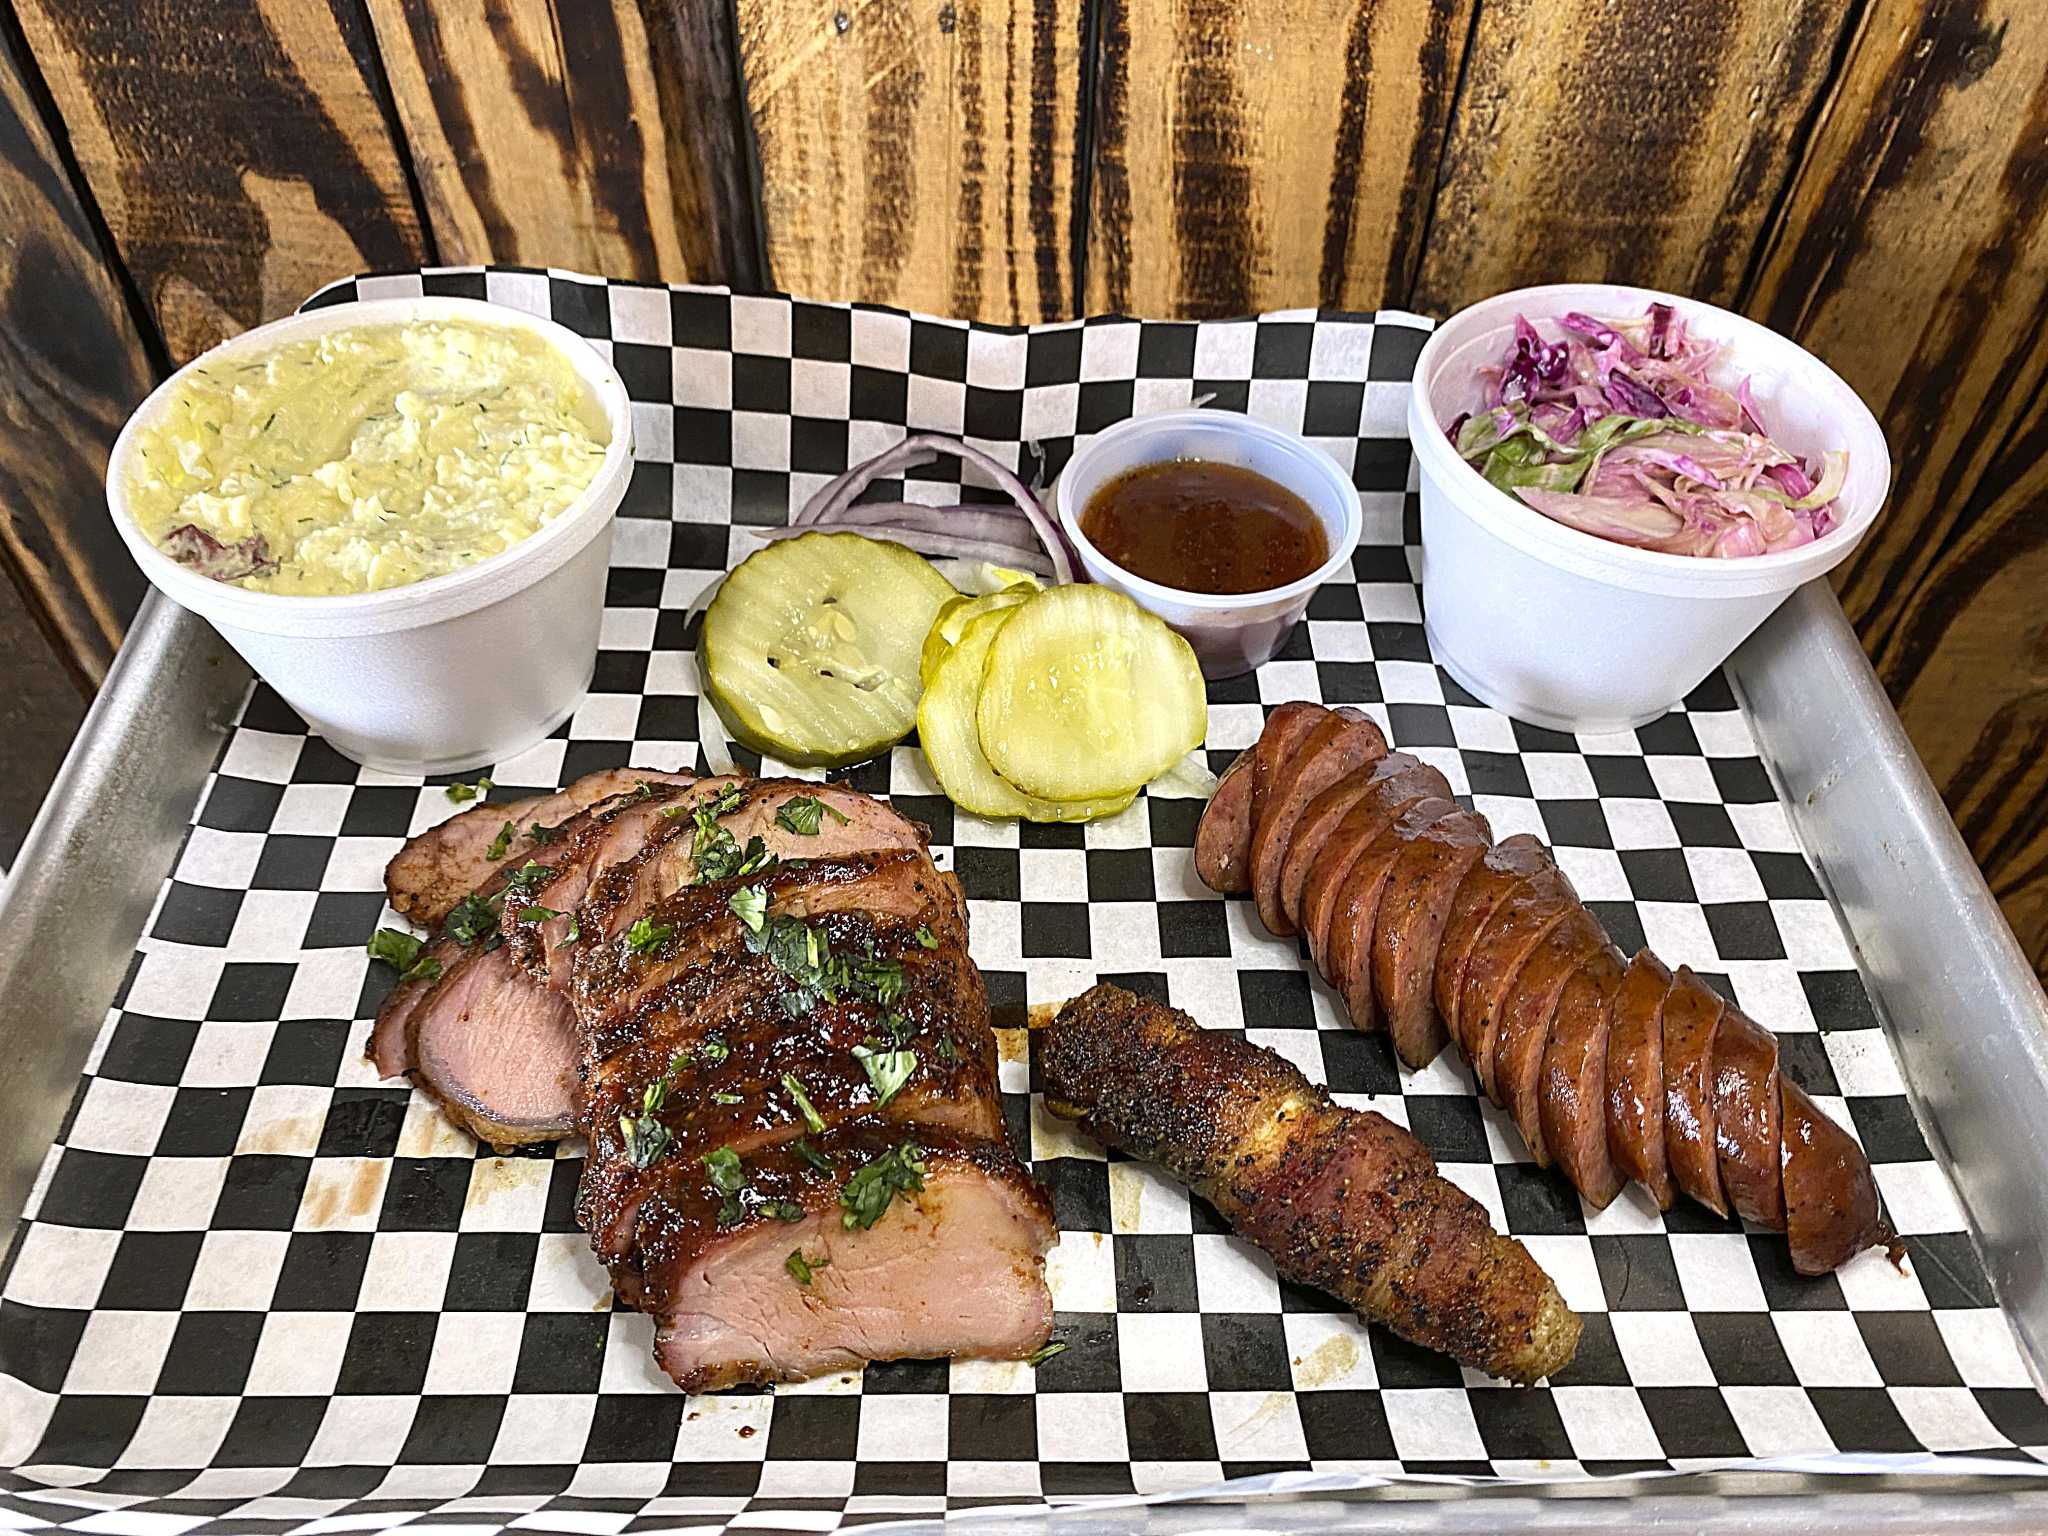 Among San Antonio’s best barbecue restaurants are 3 new places that